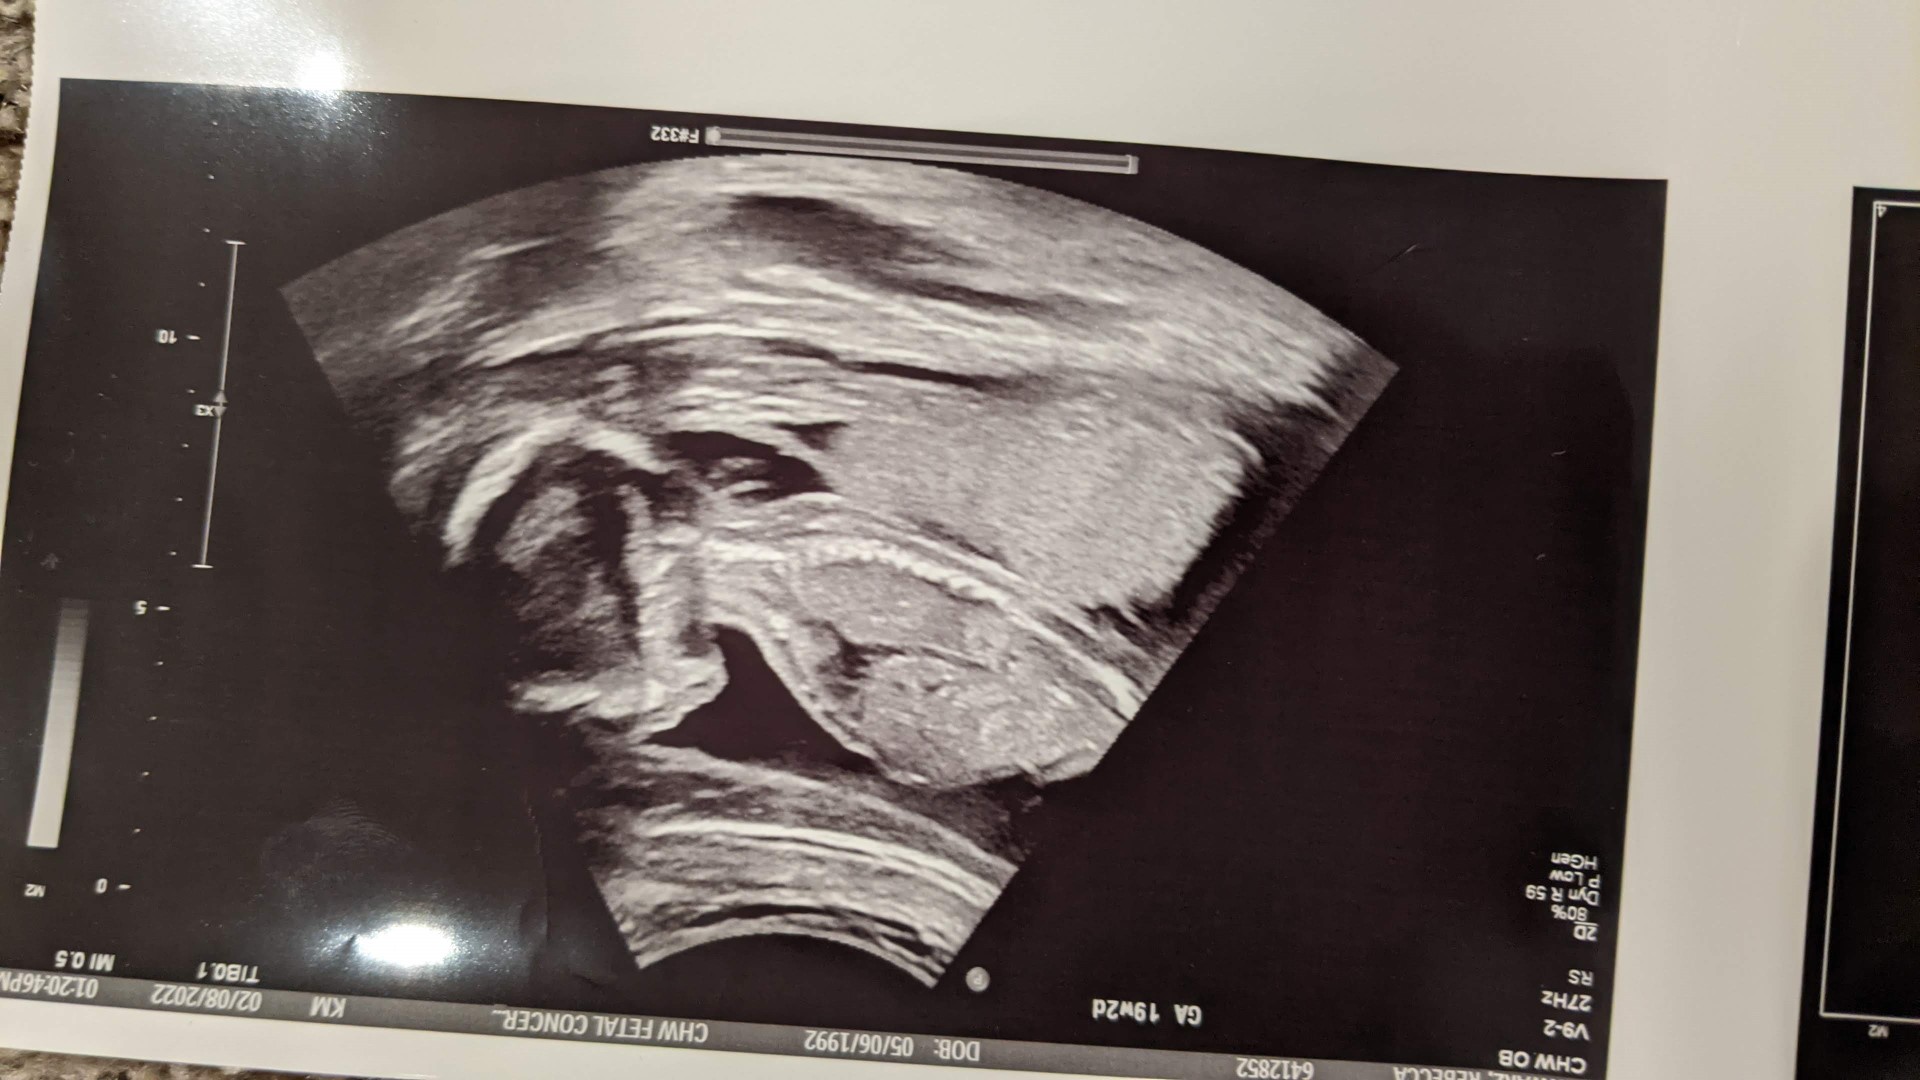 Our Second Son in Ultrasound